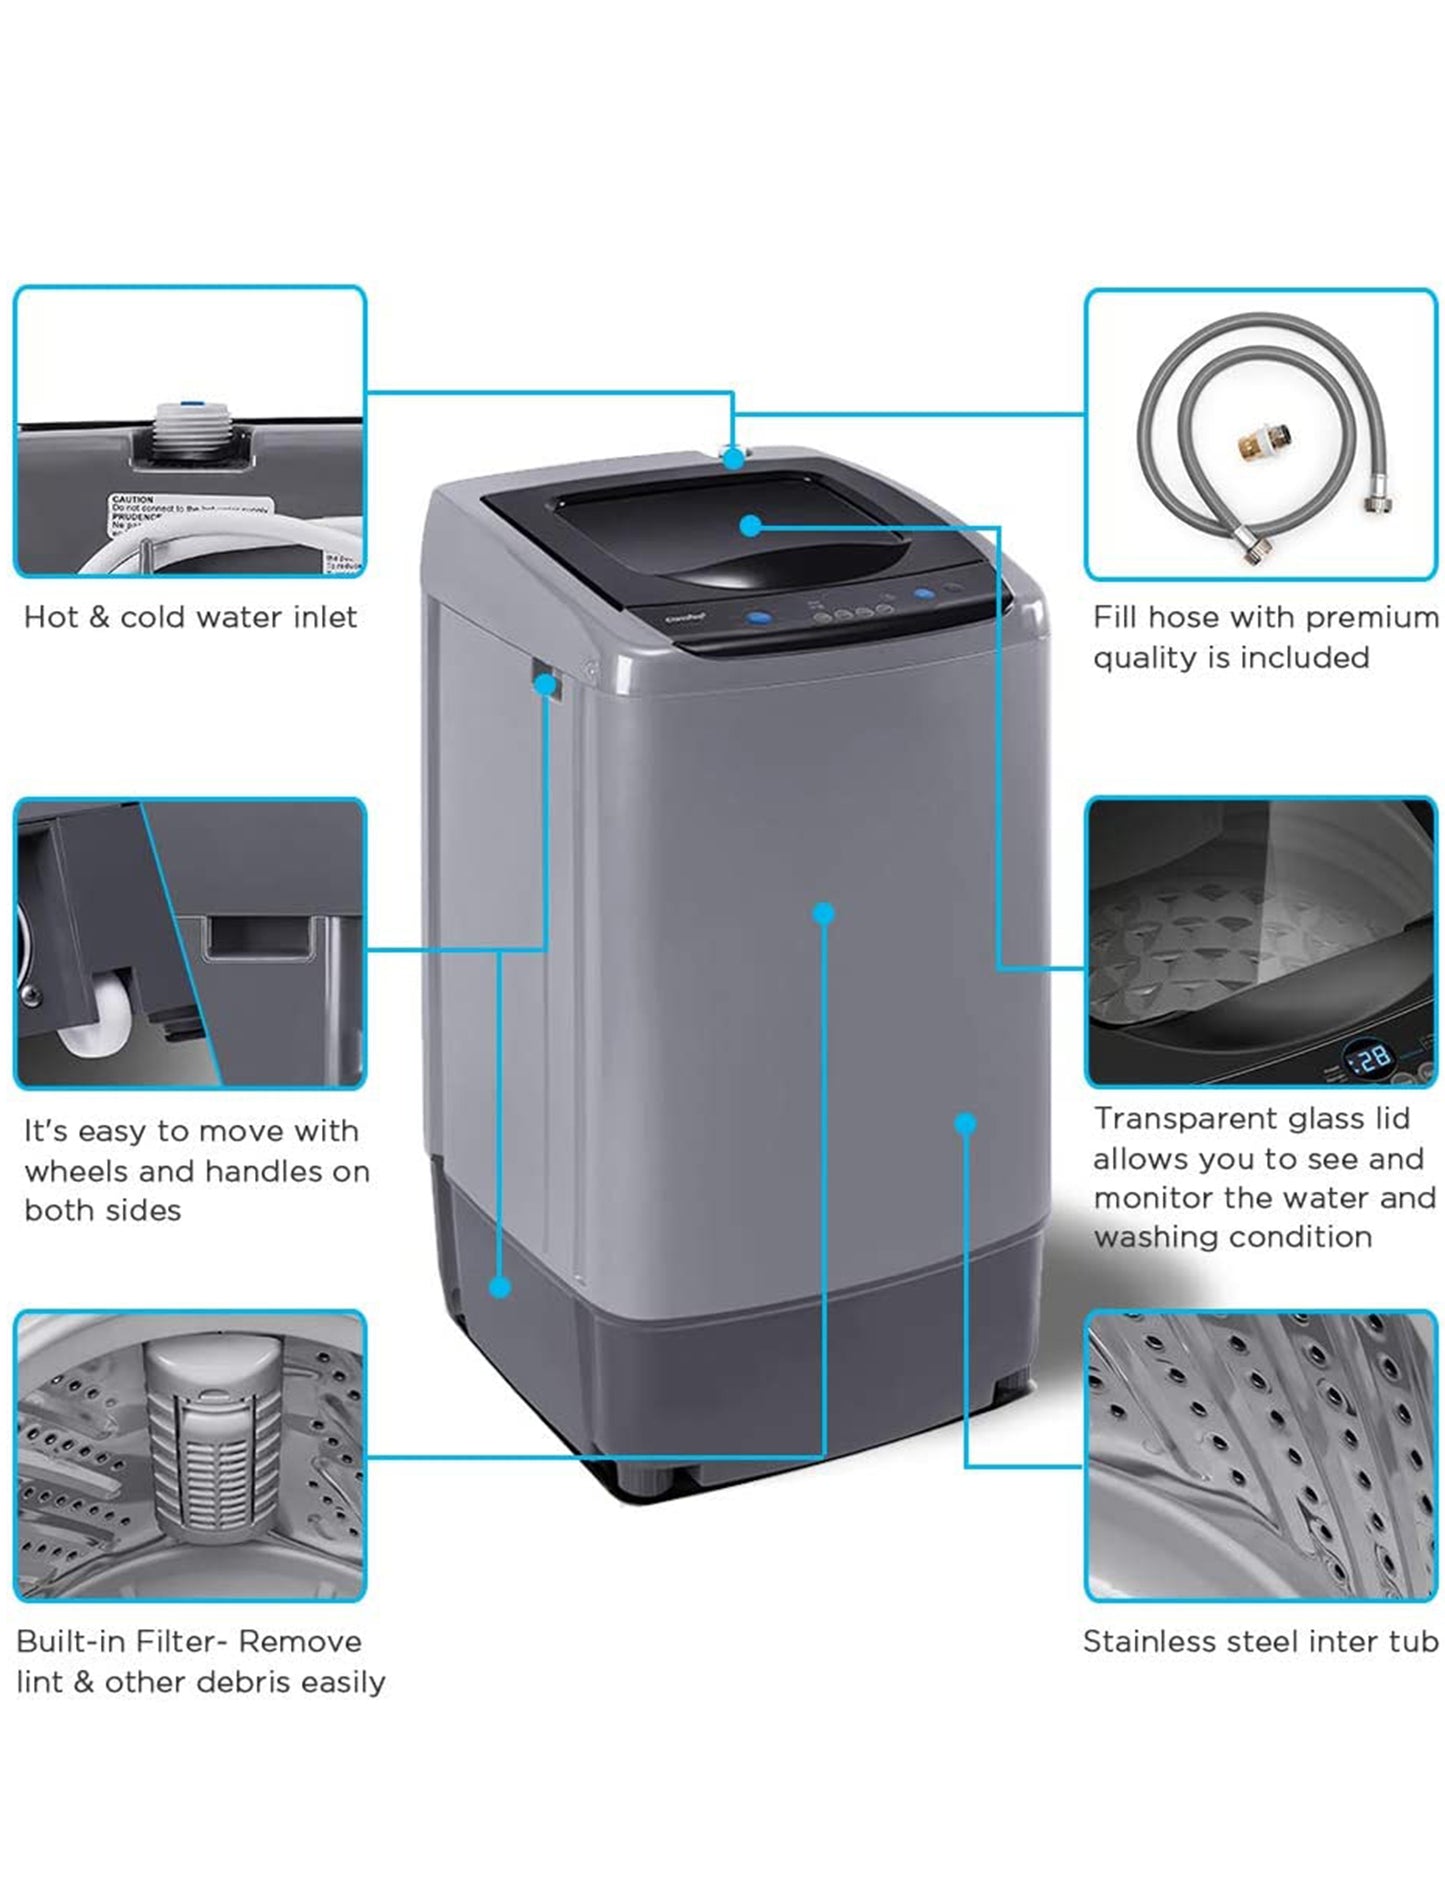 key features of comfee portable washing machine